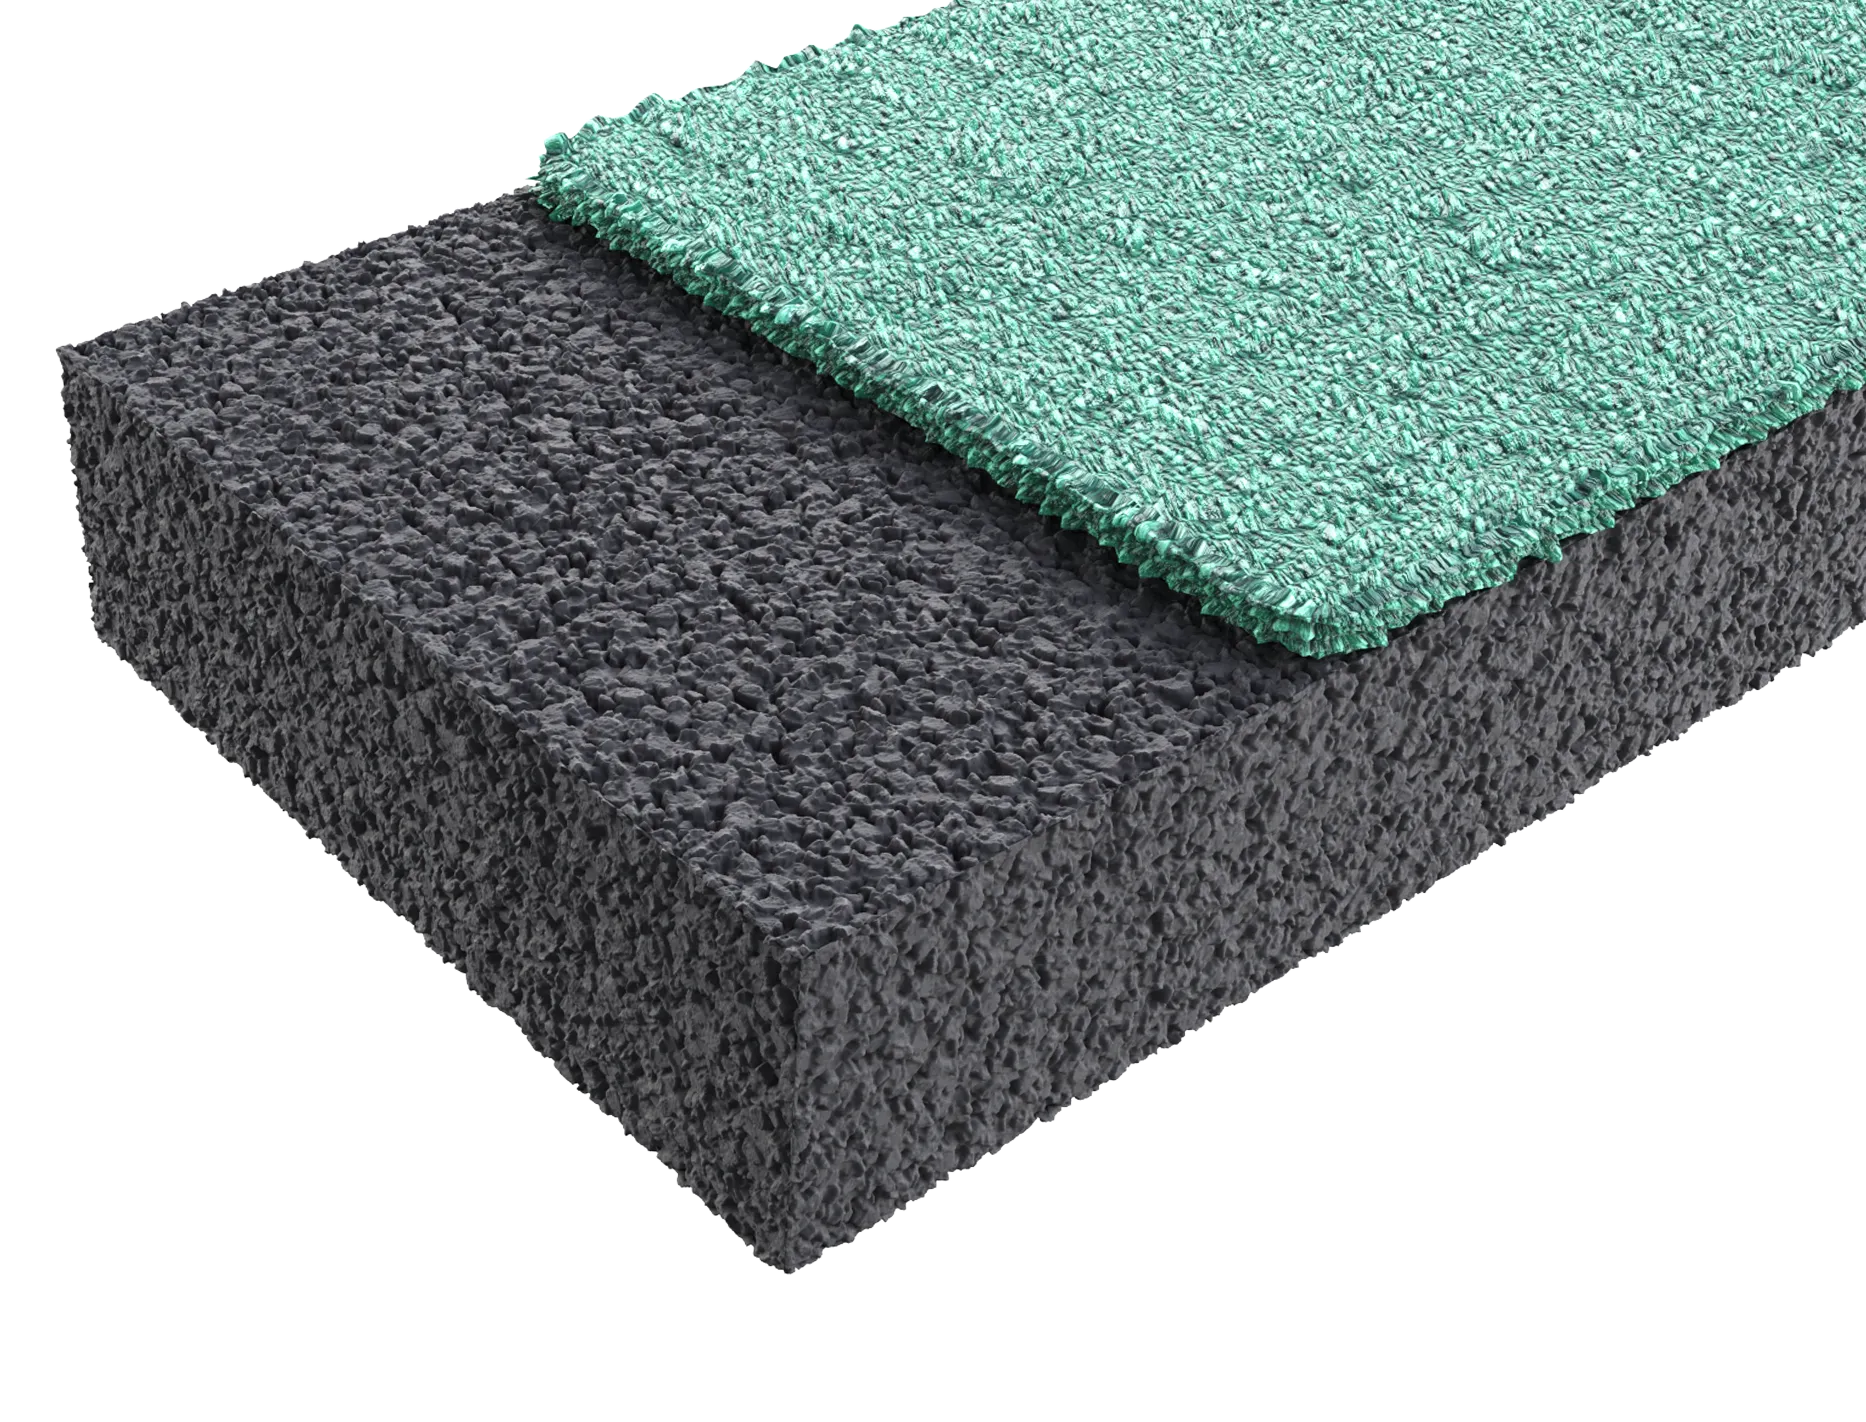 SUREPLAY® Needle felt is a textile floor covering for outdoor use